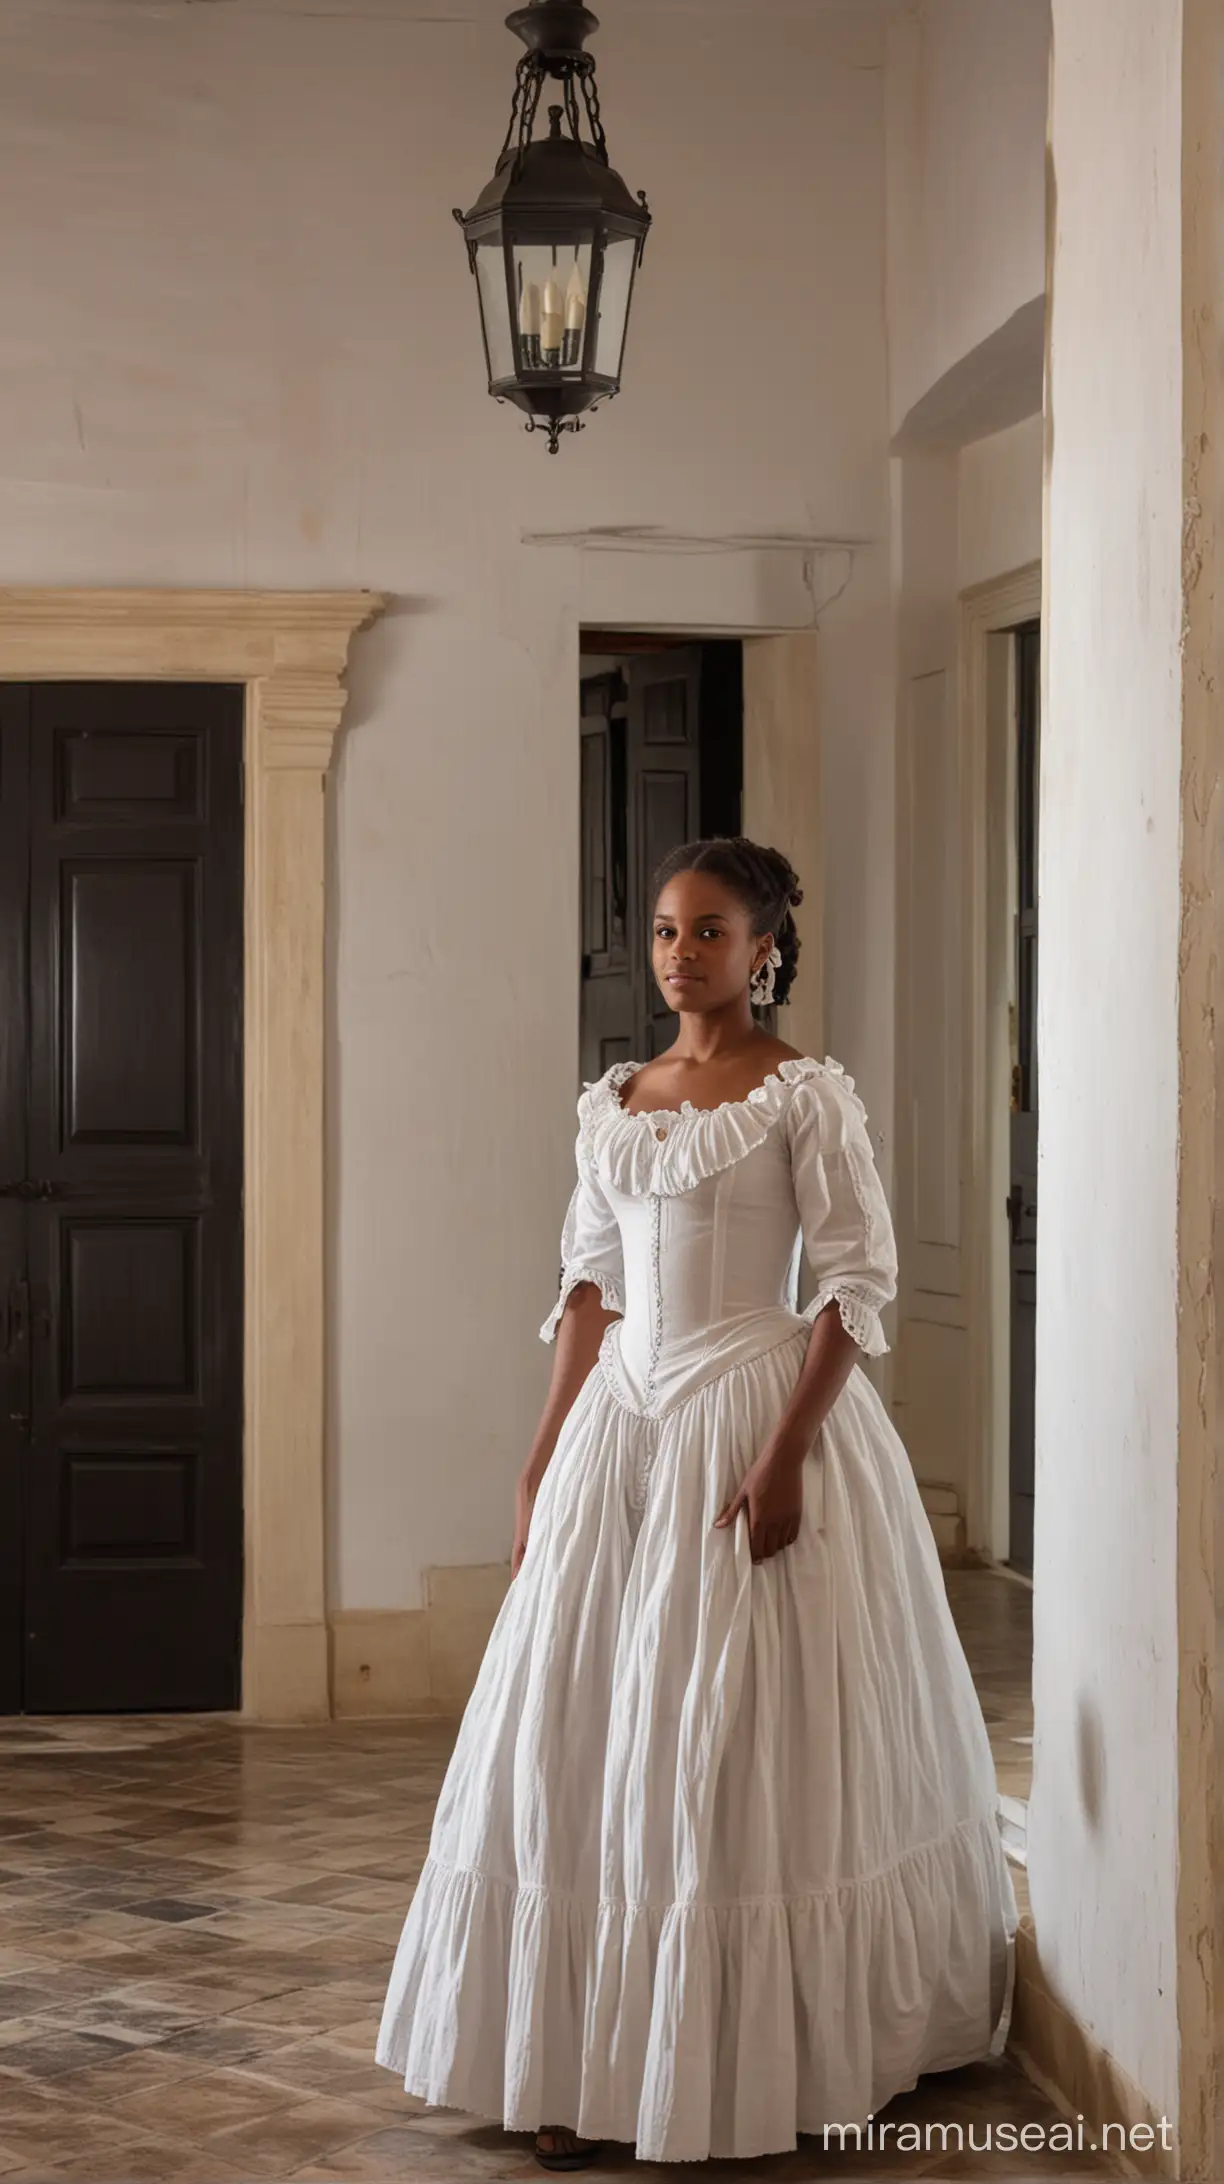 1800s Black female inside colonial house  in cartagena



